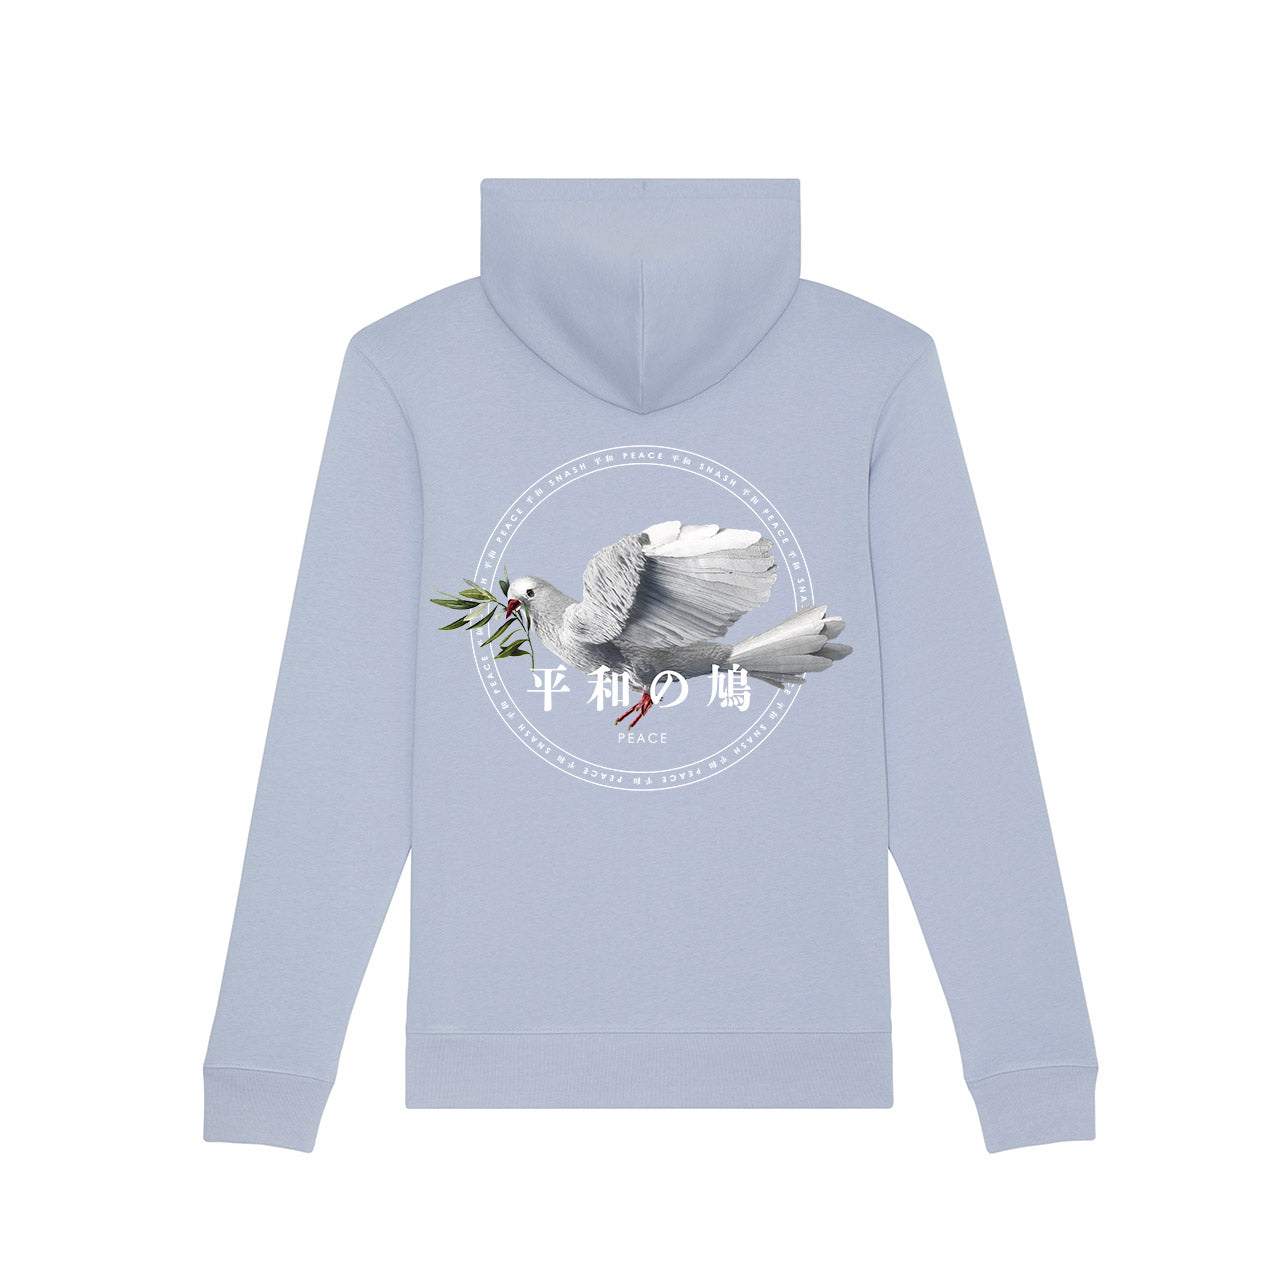 Snash - The Dove of Peace Hoodie